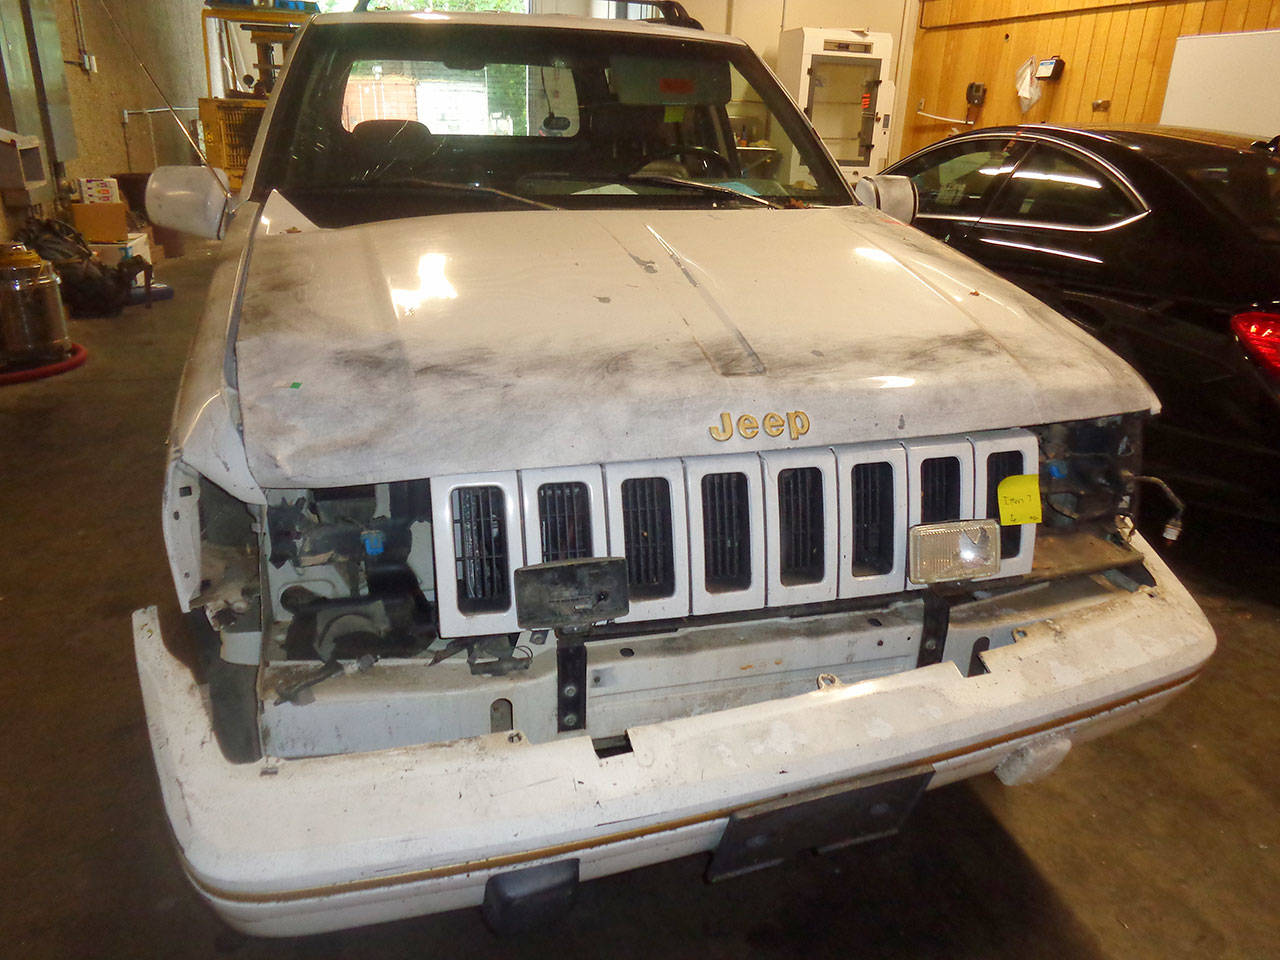 Issaquah hit-and-run investigation progressing after Jeep discovery